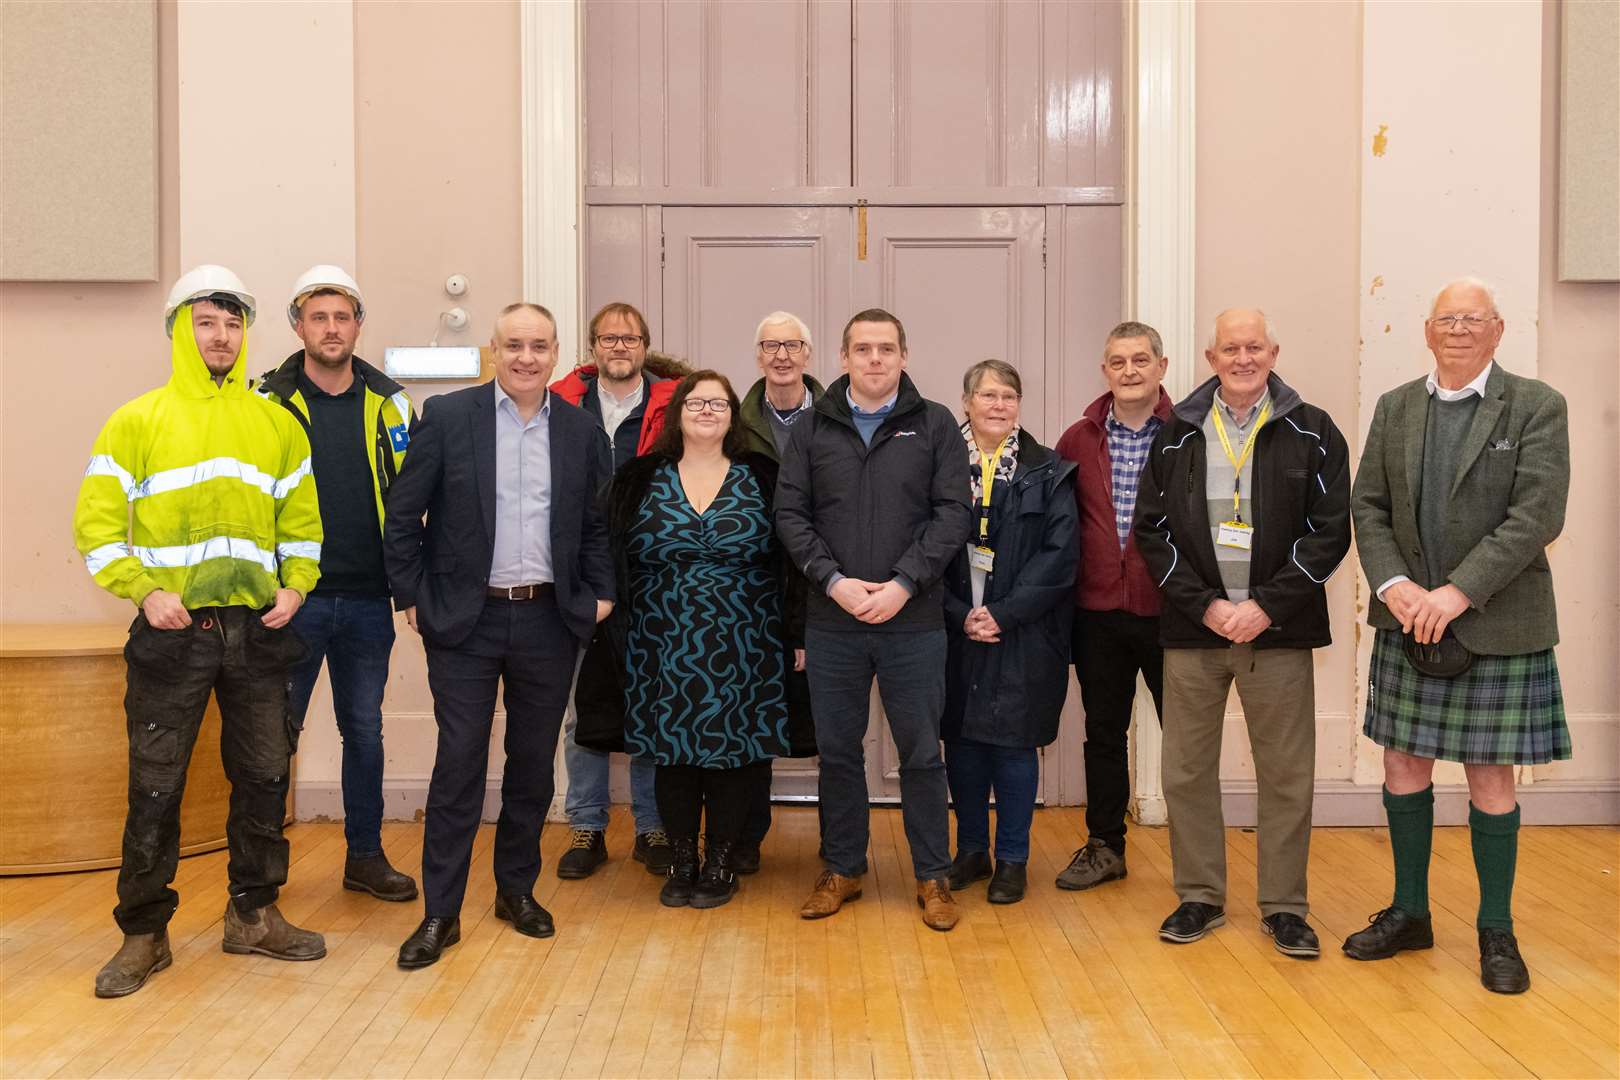 MP Douglas Ross, MSP Richard Lochhead, Money for Moray and Forres Area Community Trust members are shown around the first phase of the refurbishment.